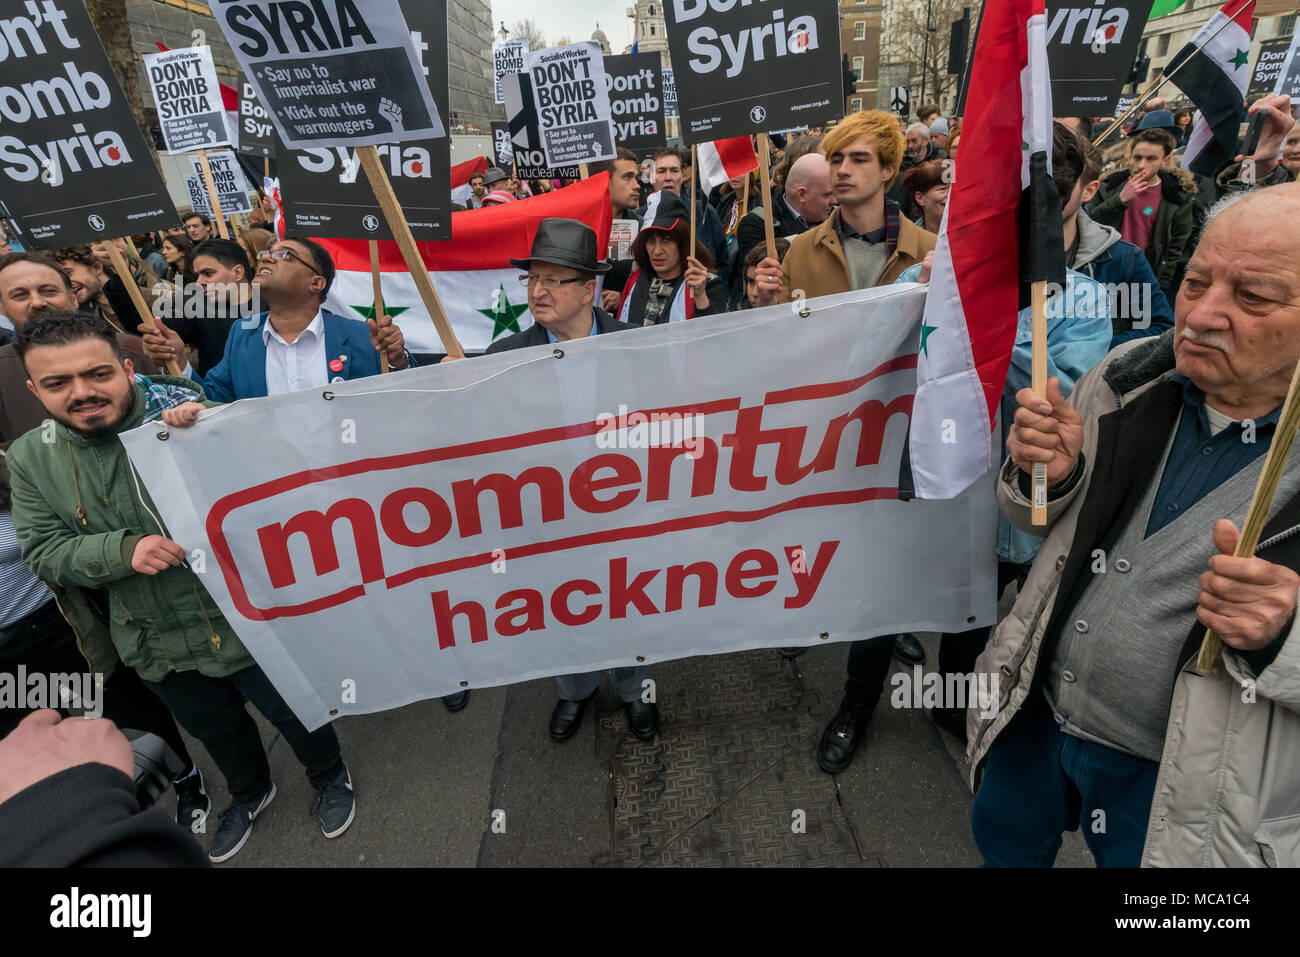 April 13, 2018 - London, UK. 13th April 2018. Hackney Momentum banner in road bloack. Stop the War and Syrians protest at Downing St calling for Theresea May to stop her plans to bomb Syria with the USA and France following the reports of a chemical weapon attack there. Stop the War handed in a letter signed by MPs, trade unionists and others and held a rally on the opposite side of Whitehall, with speeches from Stop the War and other activists. Noisy chanting continued and many of those present crossed the road to protest outside Downing St before blocking both carriageways of Whitehall. Afte Stock Photo